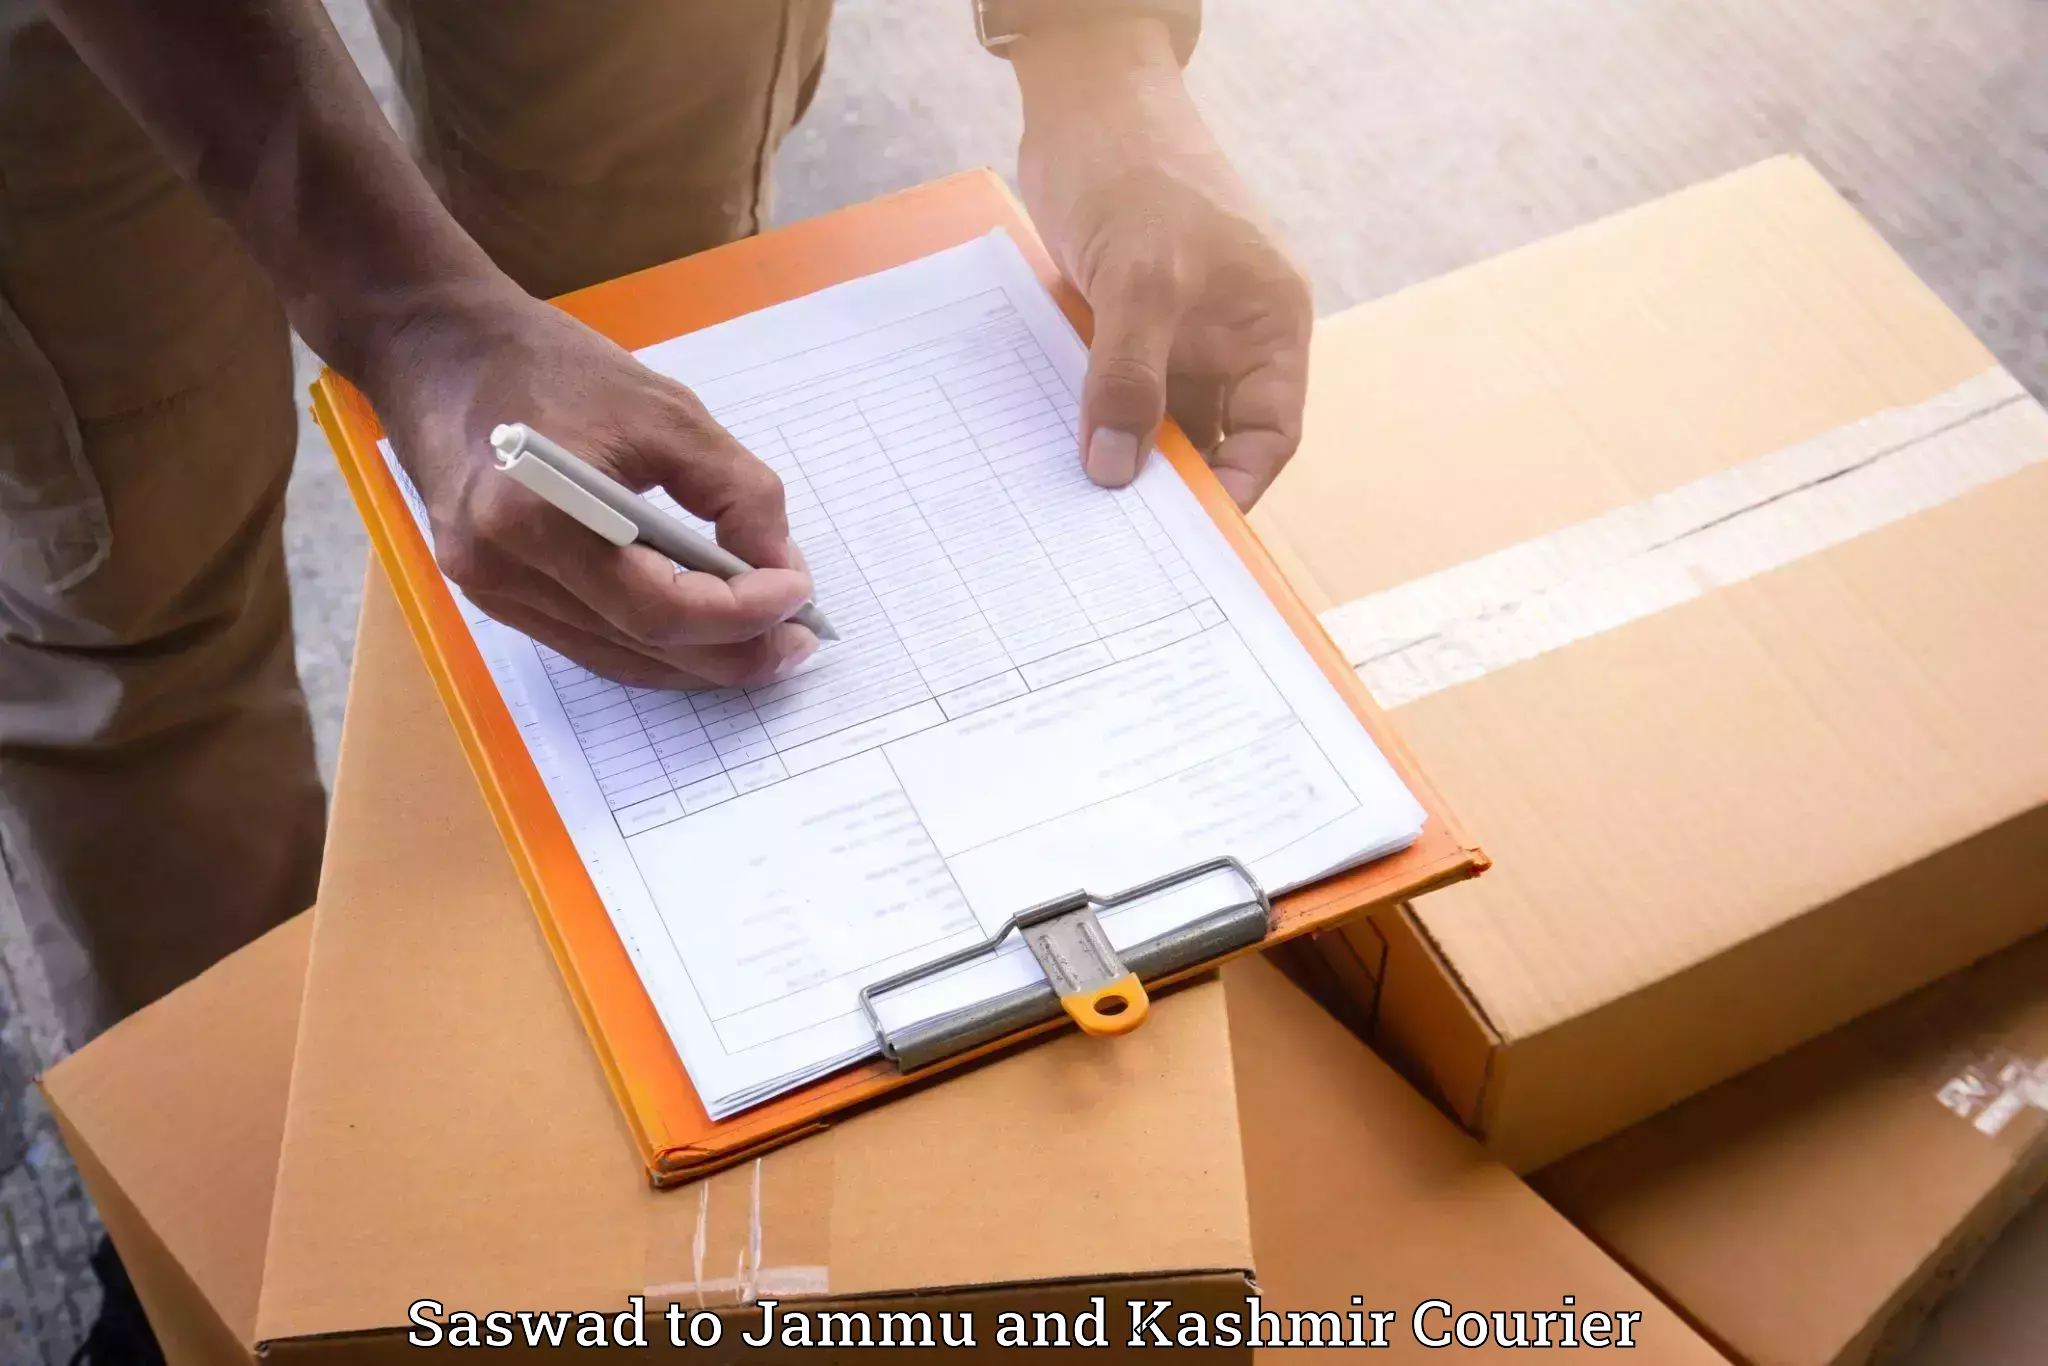 Furniture moving specialists in Saswad to Jammu and Kashmir